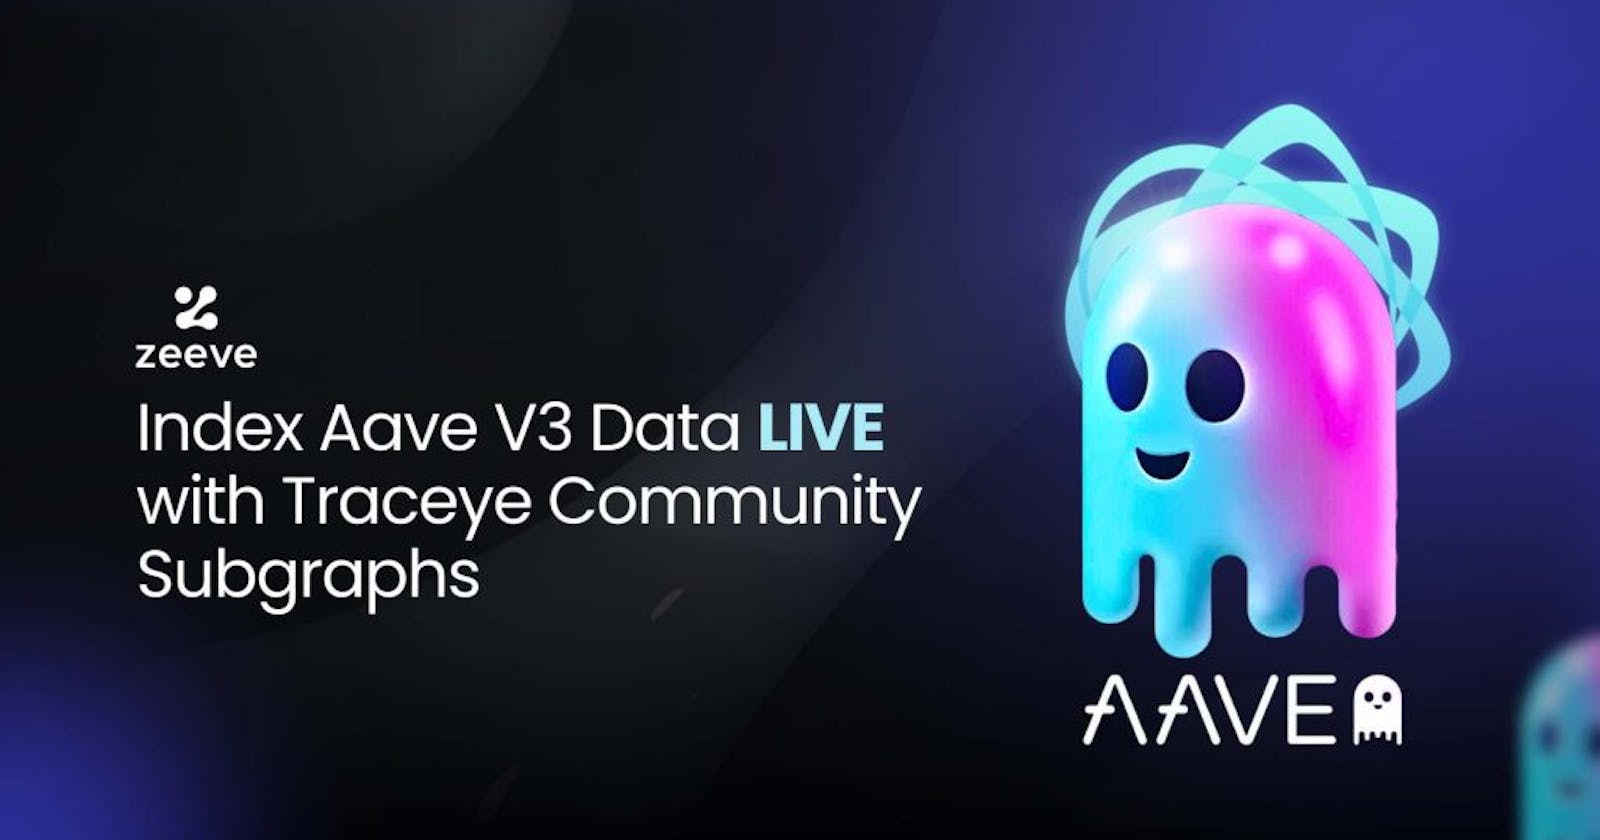 Index Aave V3 Data LIVE with Traceye Community Subgraphs